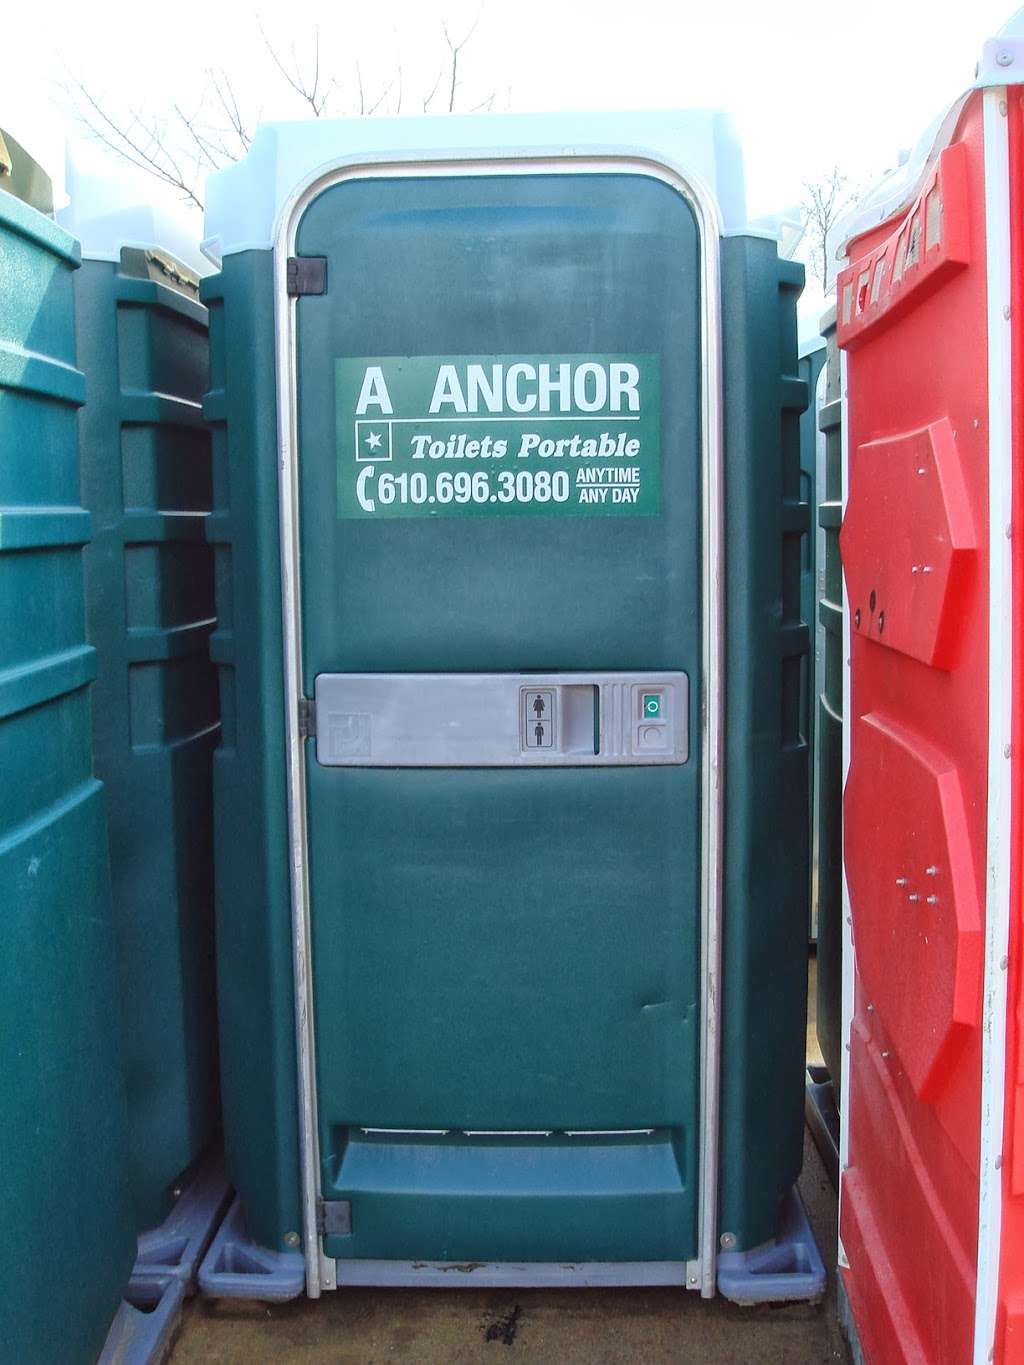 A Anchor Toilets Portable | 352 Snyder Ave, West Chester, PA 19382 | Phone: (610) 696-3080